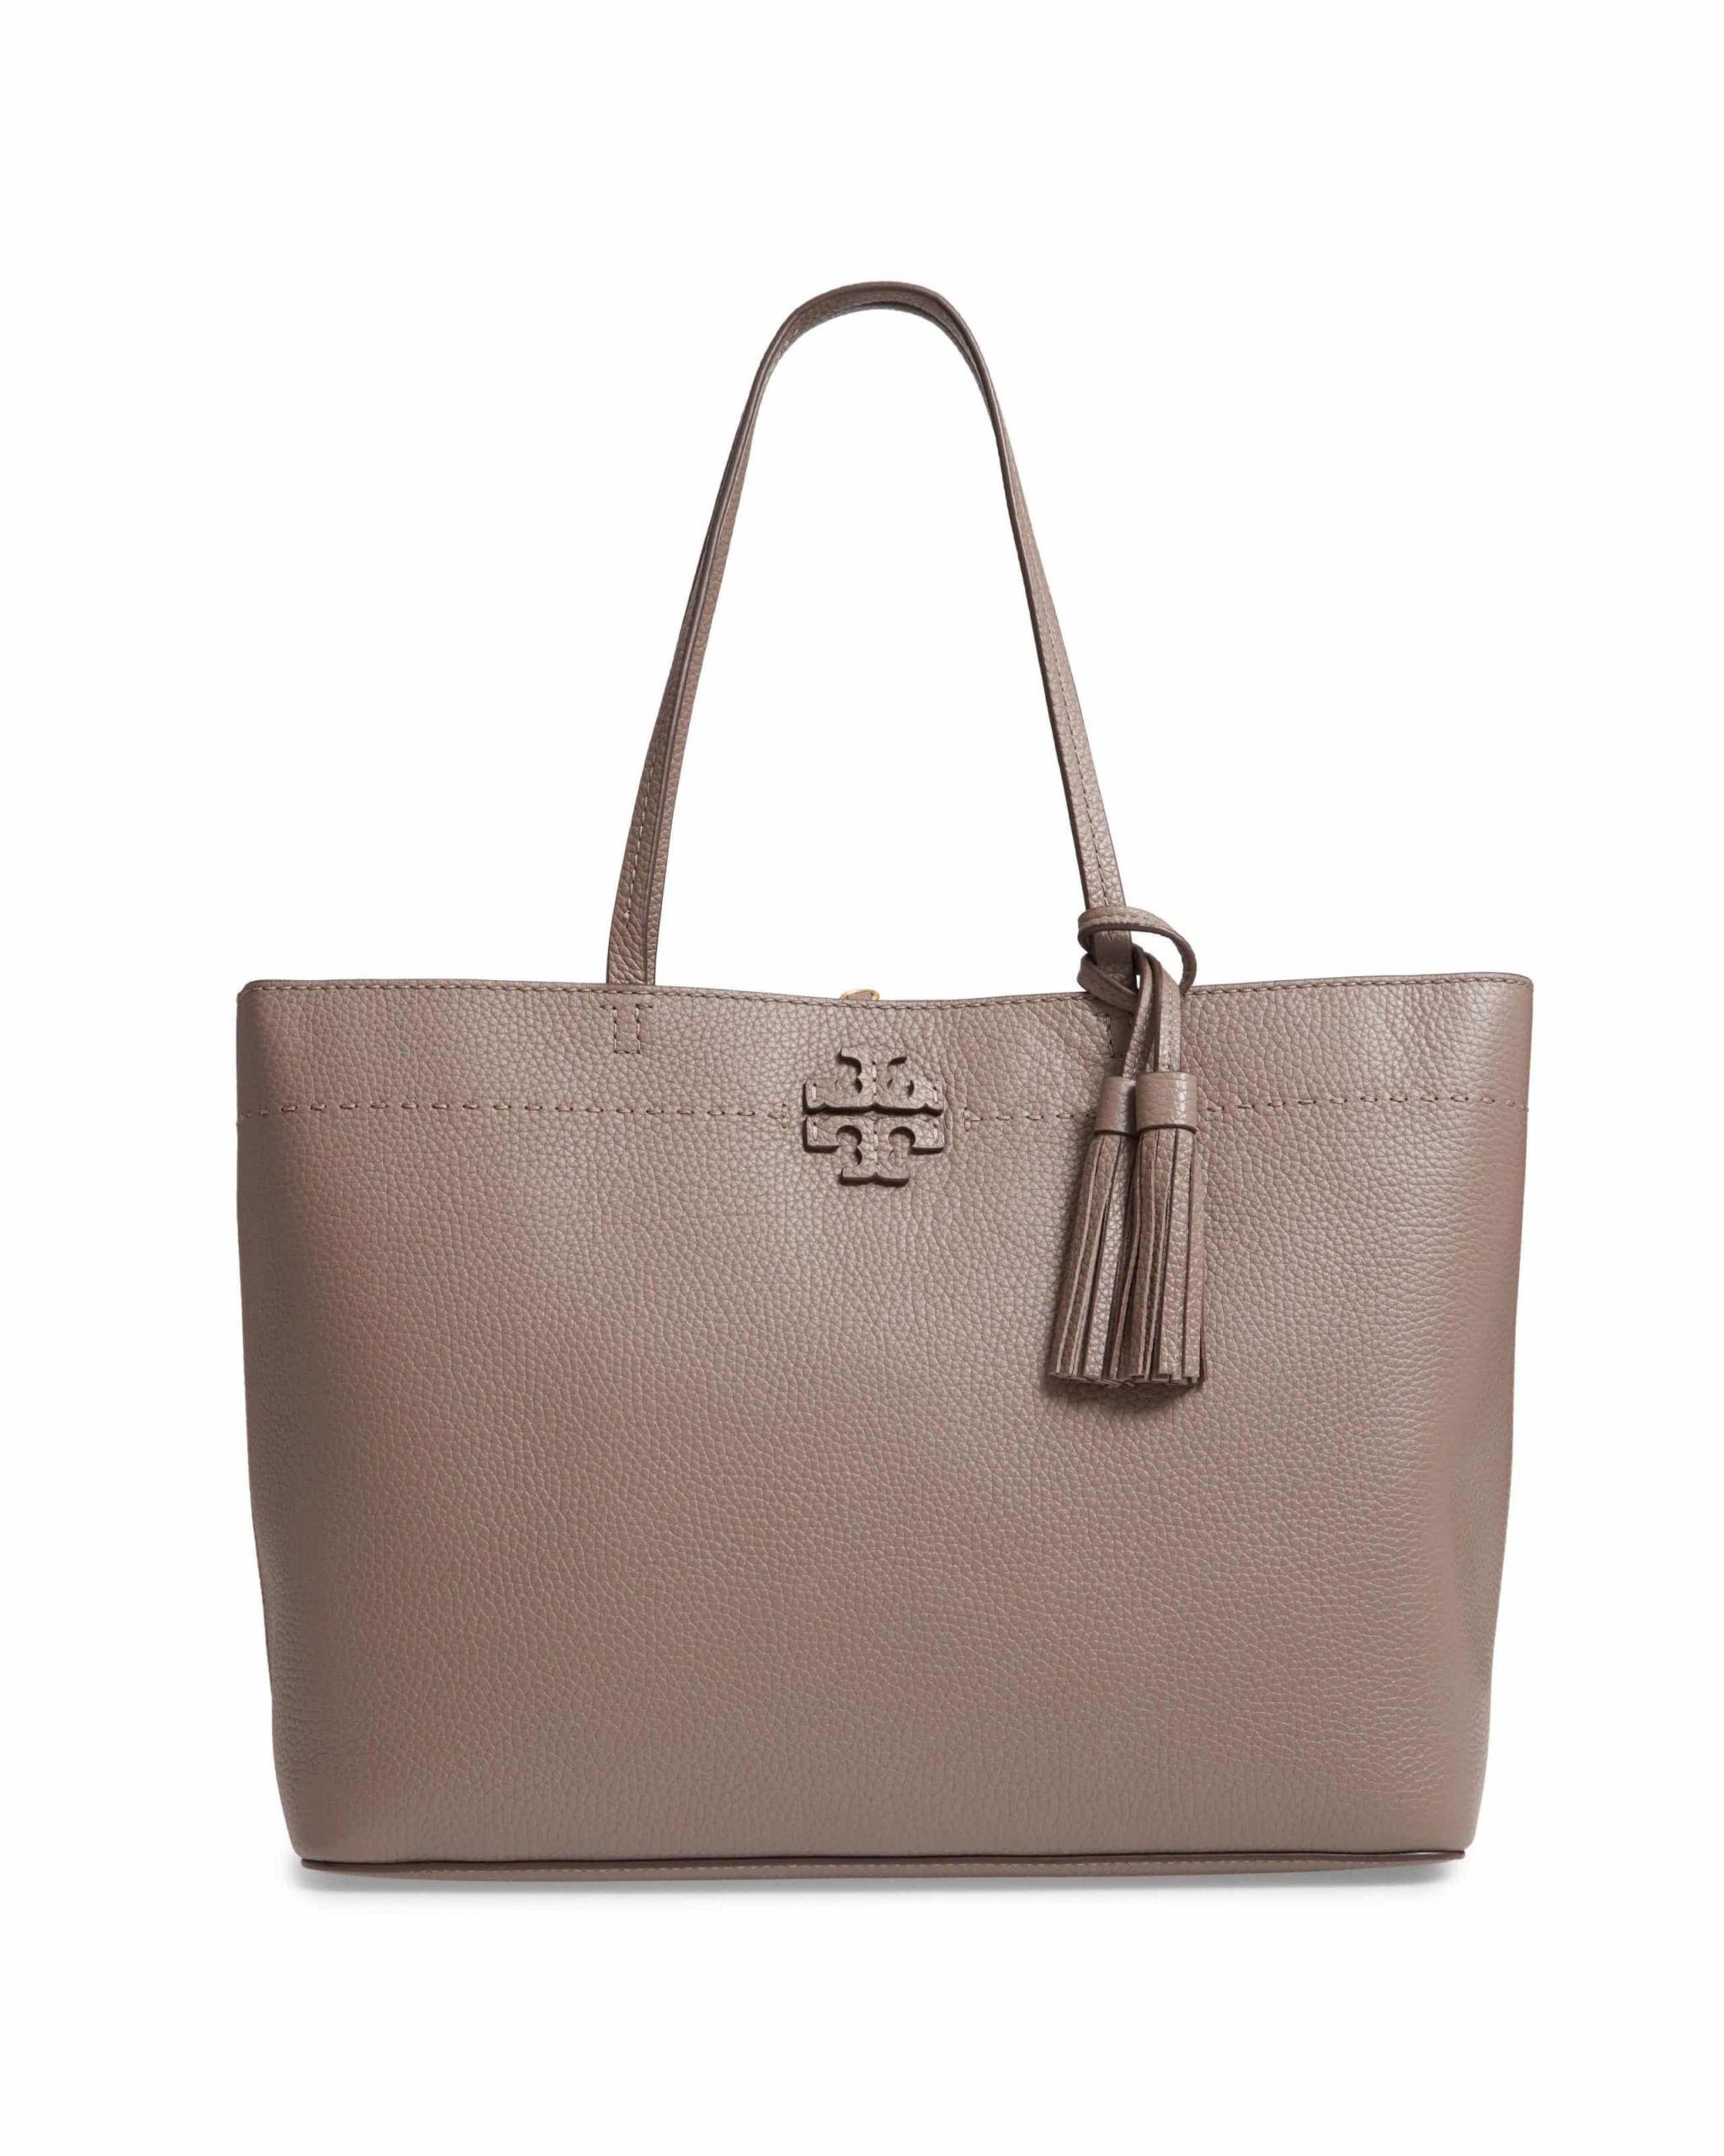 Tory Burch McGraw Leather Tote, Silver Maple